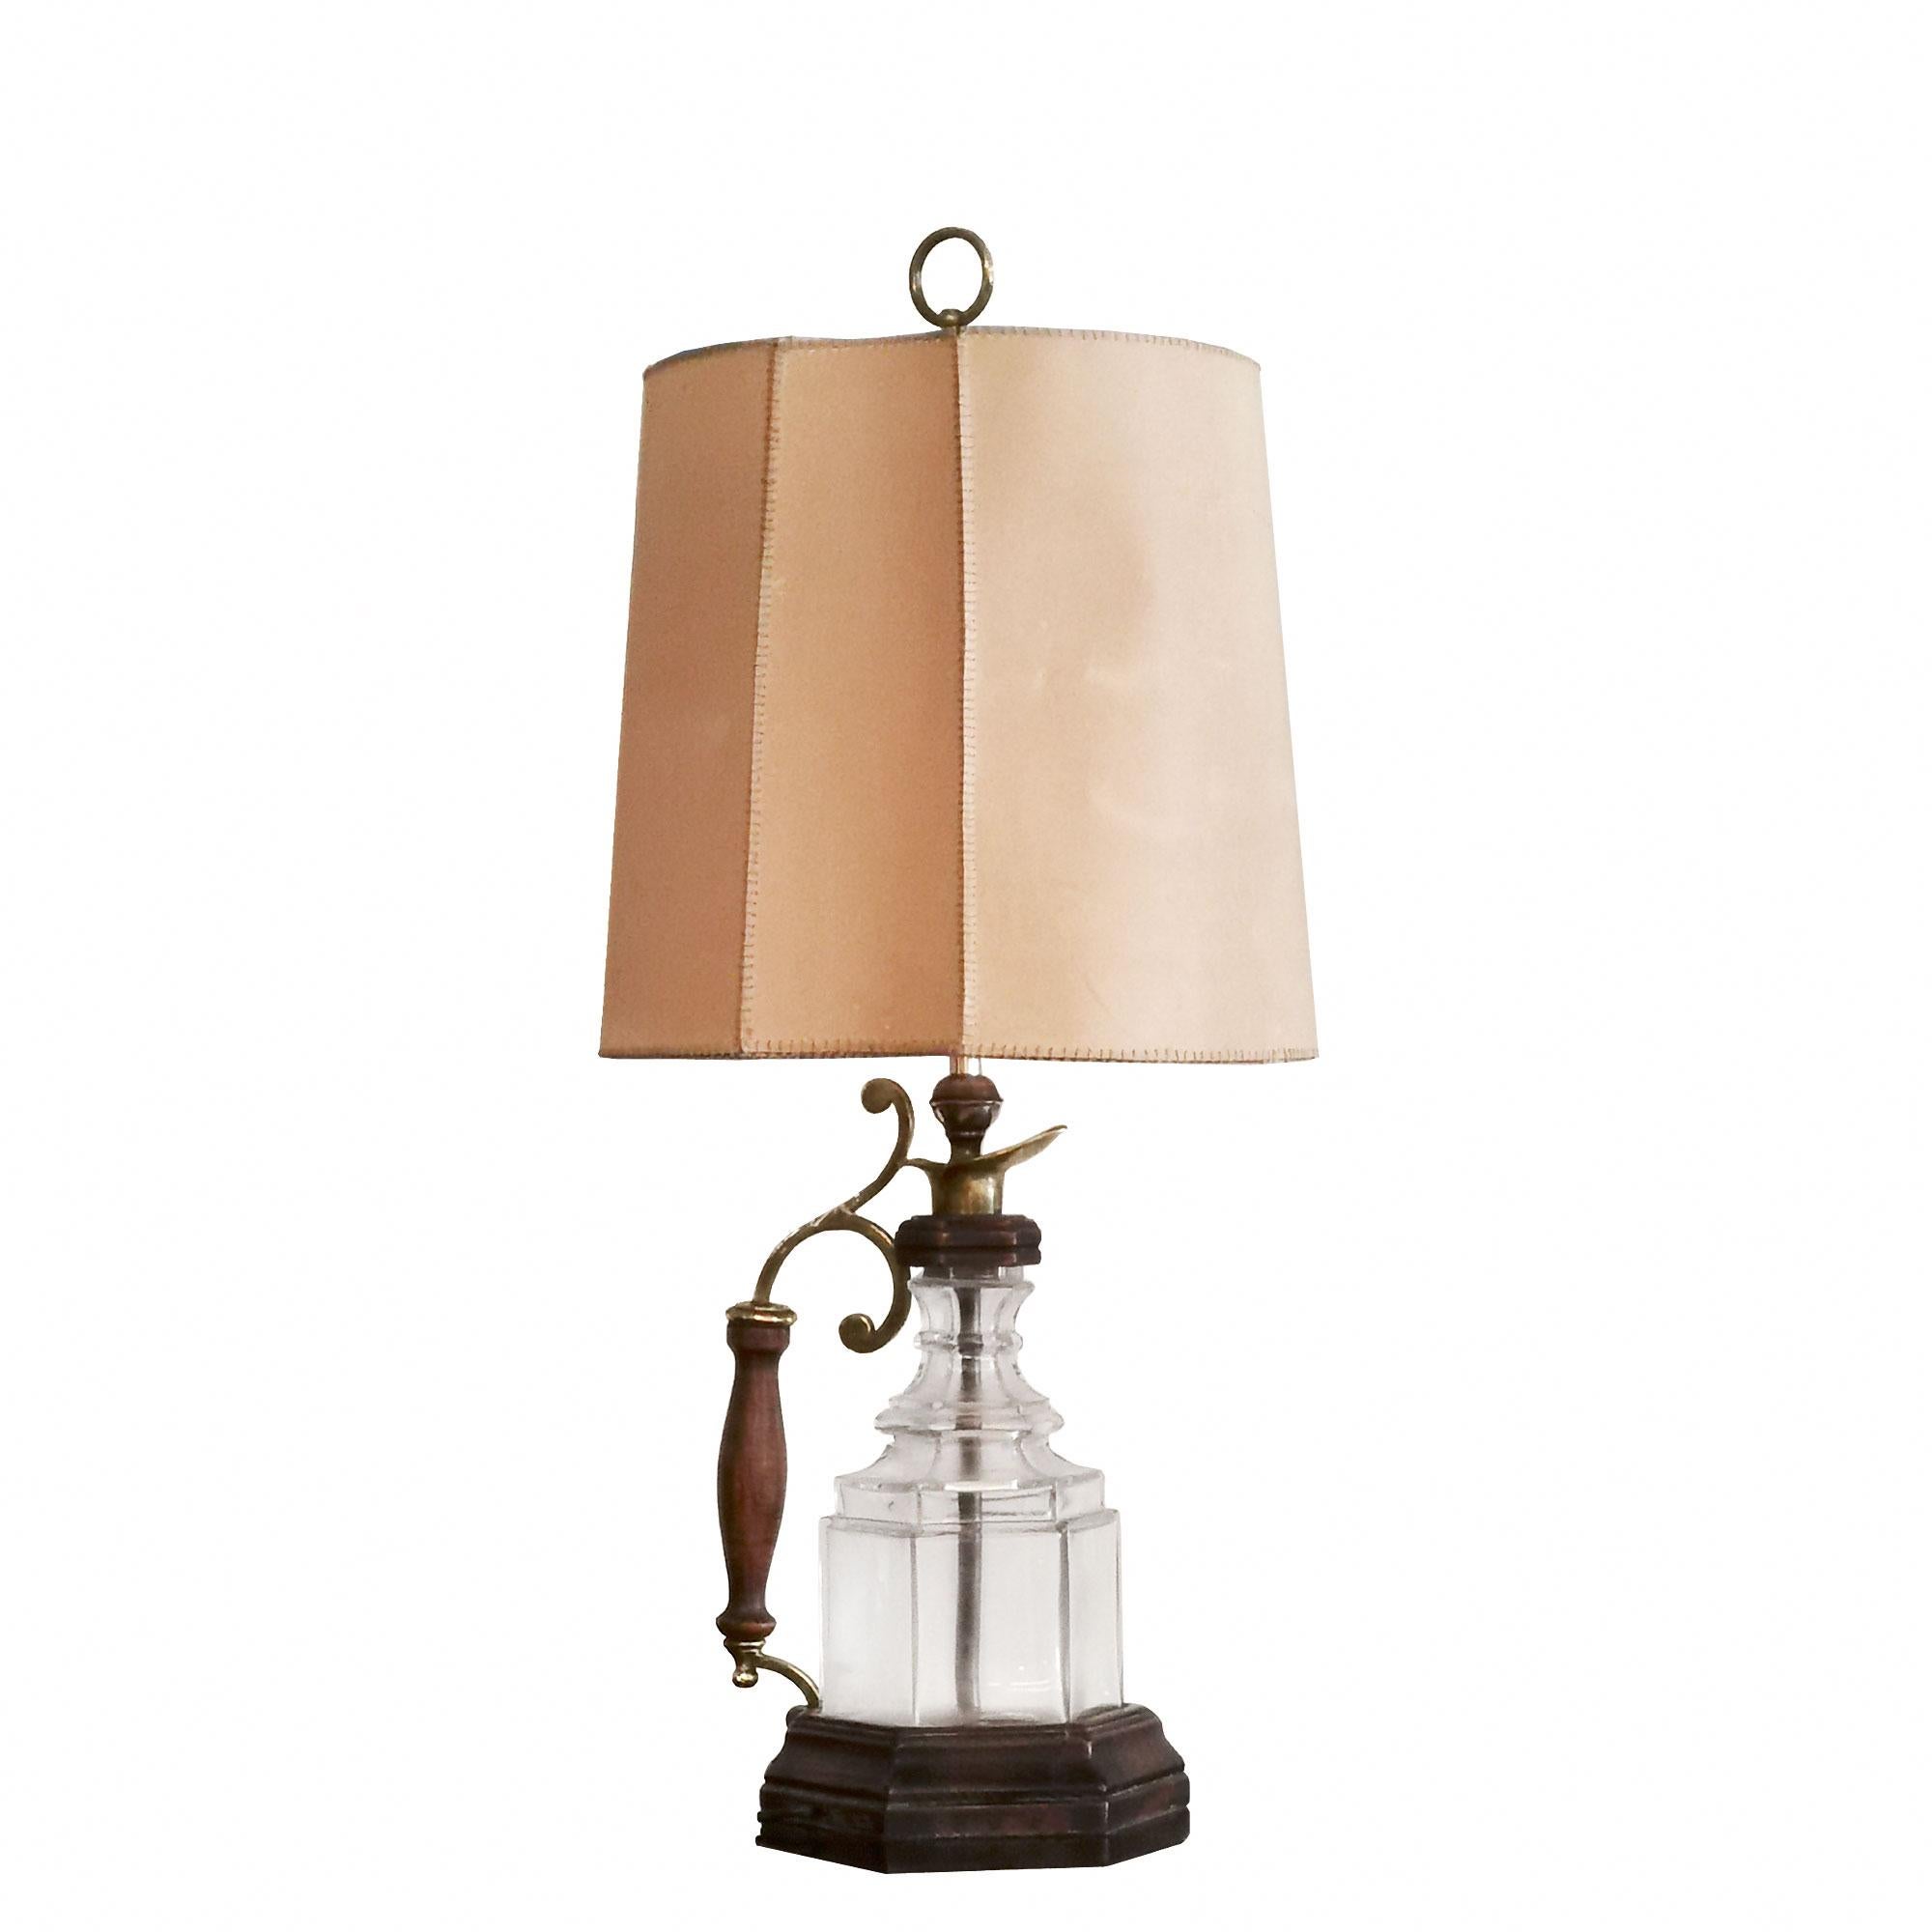 Pair of large table lamps in weathered larch wood, thick glass and solid brass. Original hand sewn parchment lampshades. Two lights.
Desing and fabrication: Valentí

Spain c. 1960

Measures: cm Diameter 40 x 86 / Lampshade Diameter 40 x